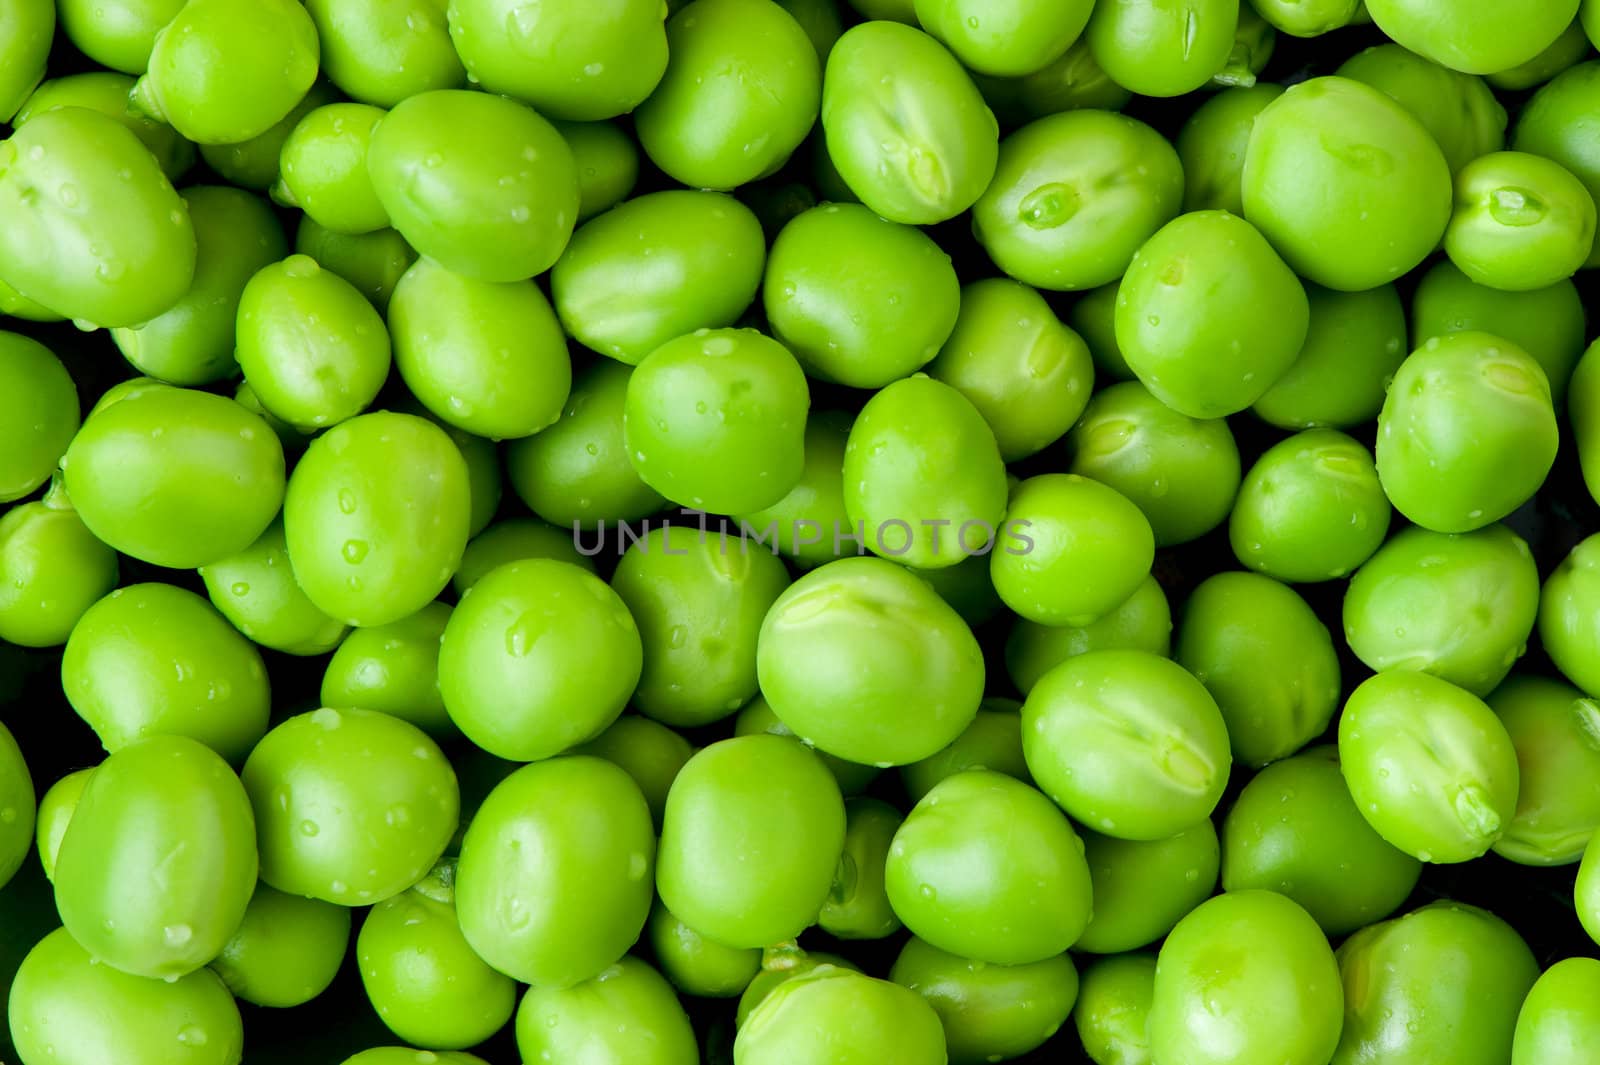 Pea background. A photo close up of green peas, bean